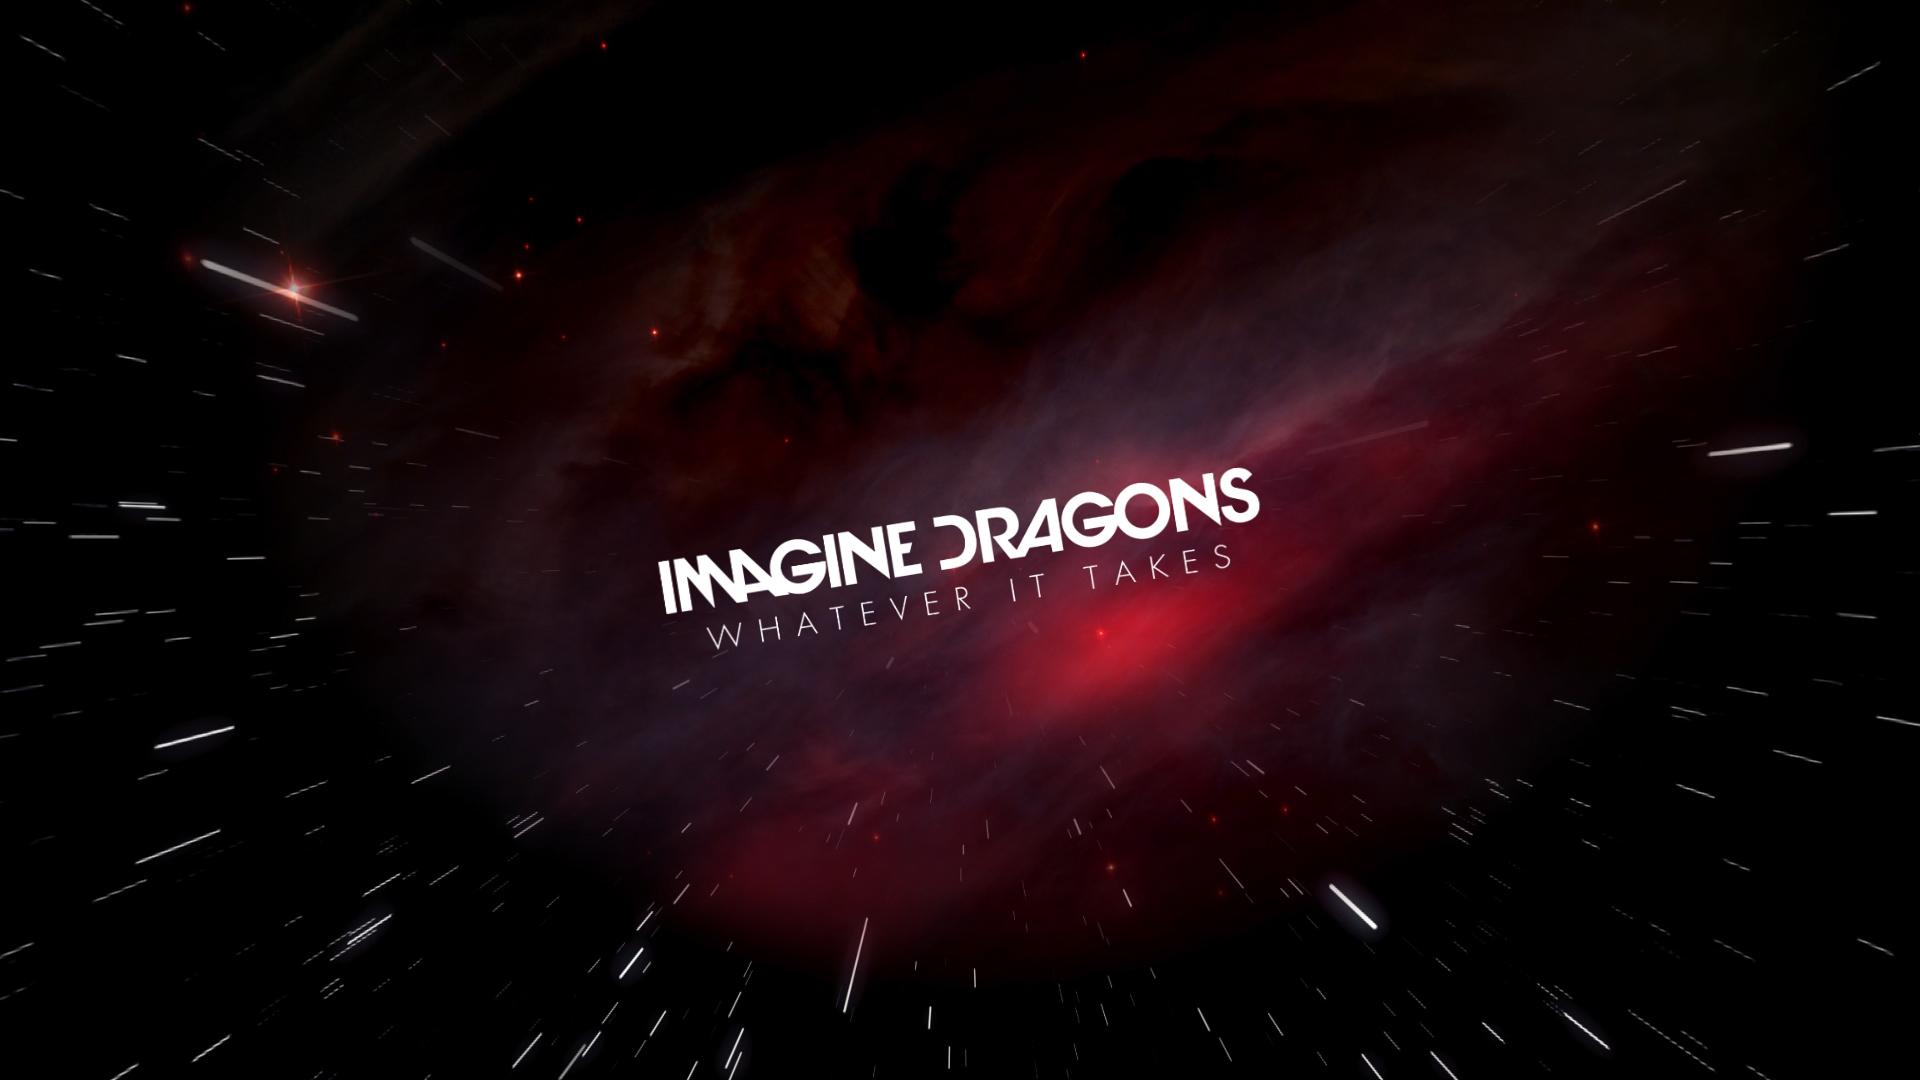 Imagine Dragons 'Whatever It Takes' by Peter Reeve. Videos